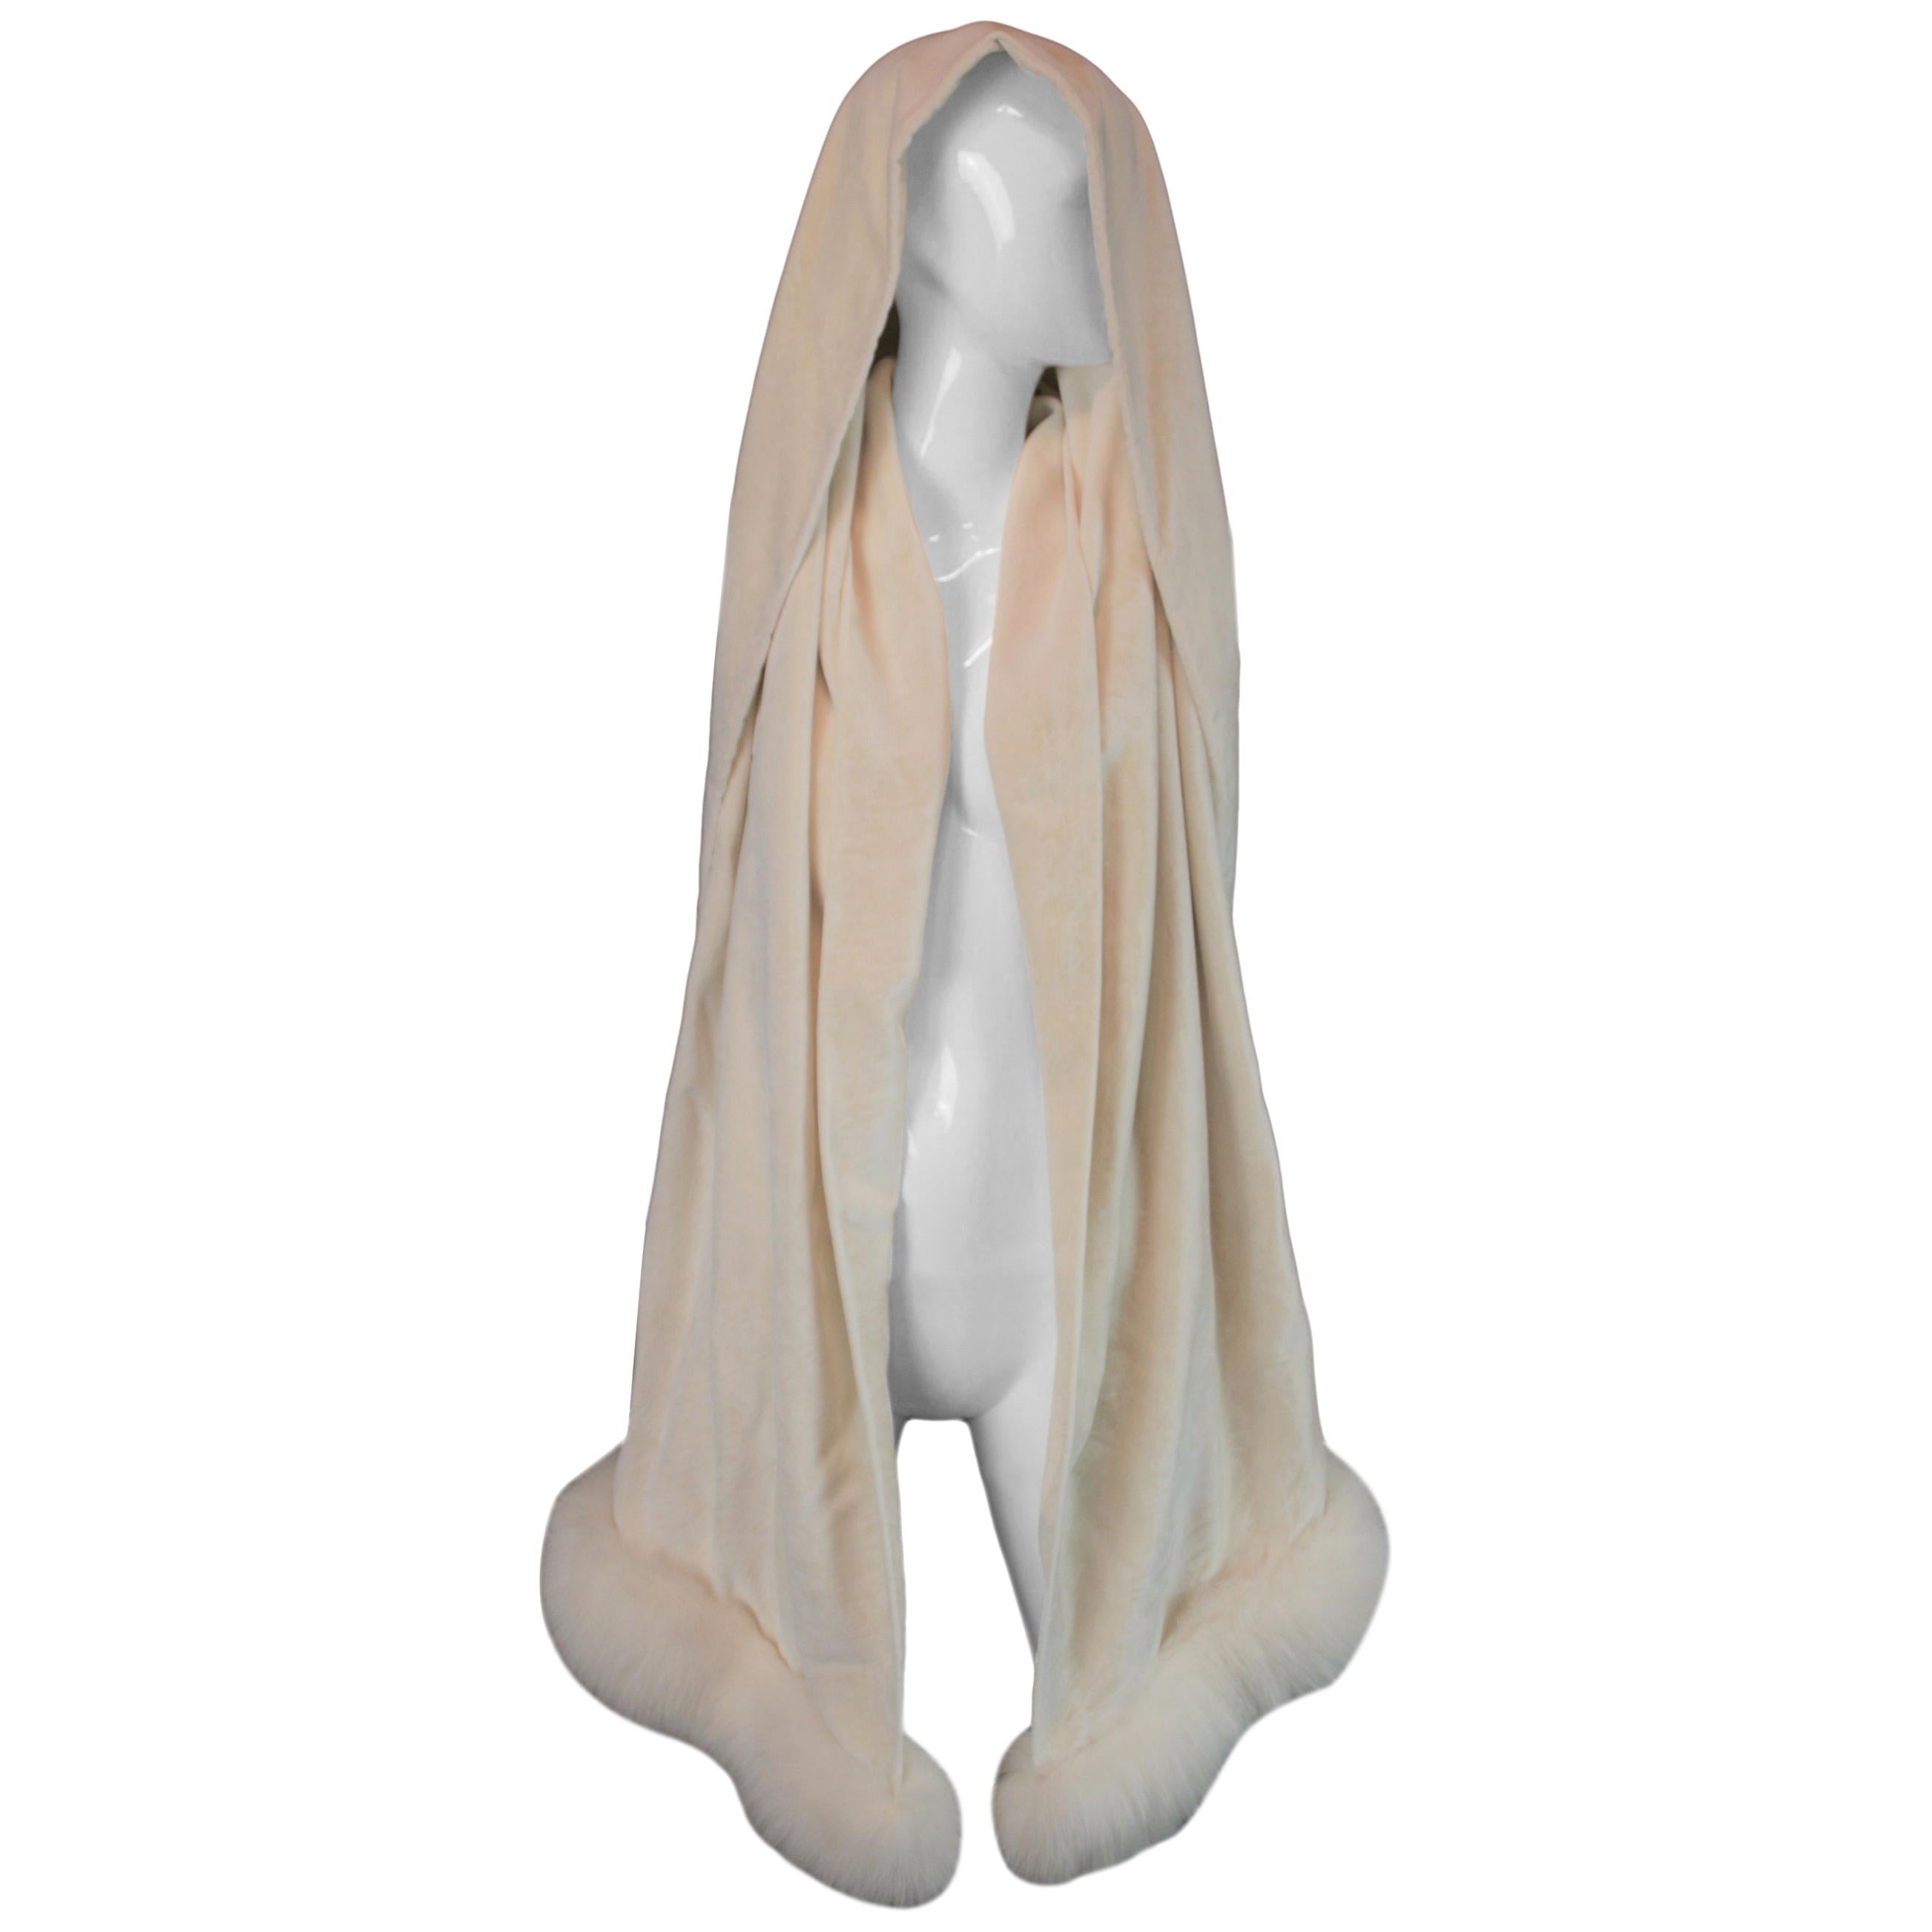 1998 Atelier Versace New With Tags Ivory Silk Velvet Ermine Fur Wrap Stole Scarf For Sale